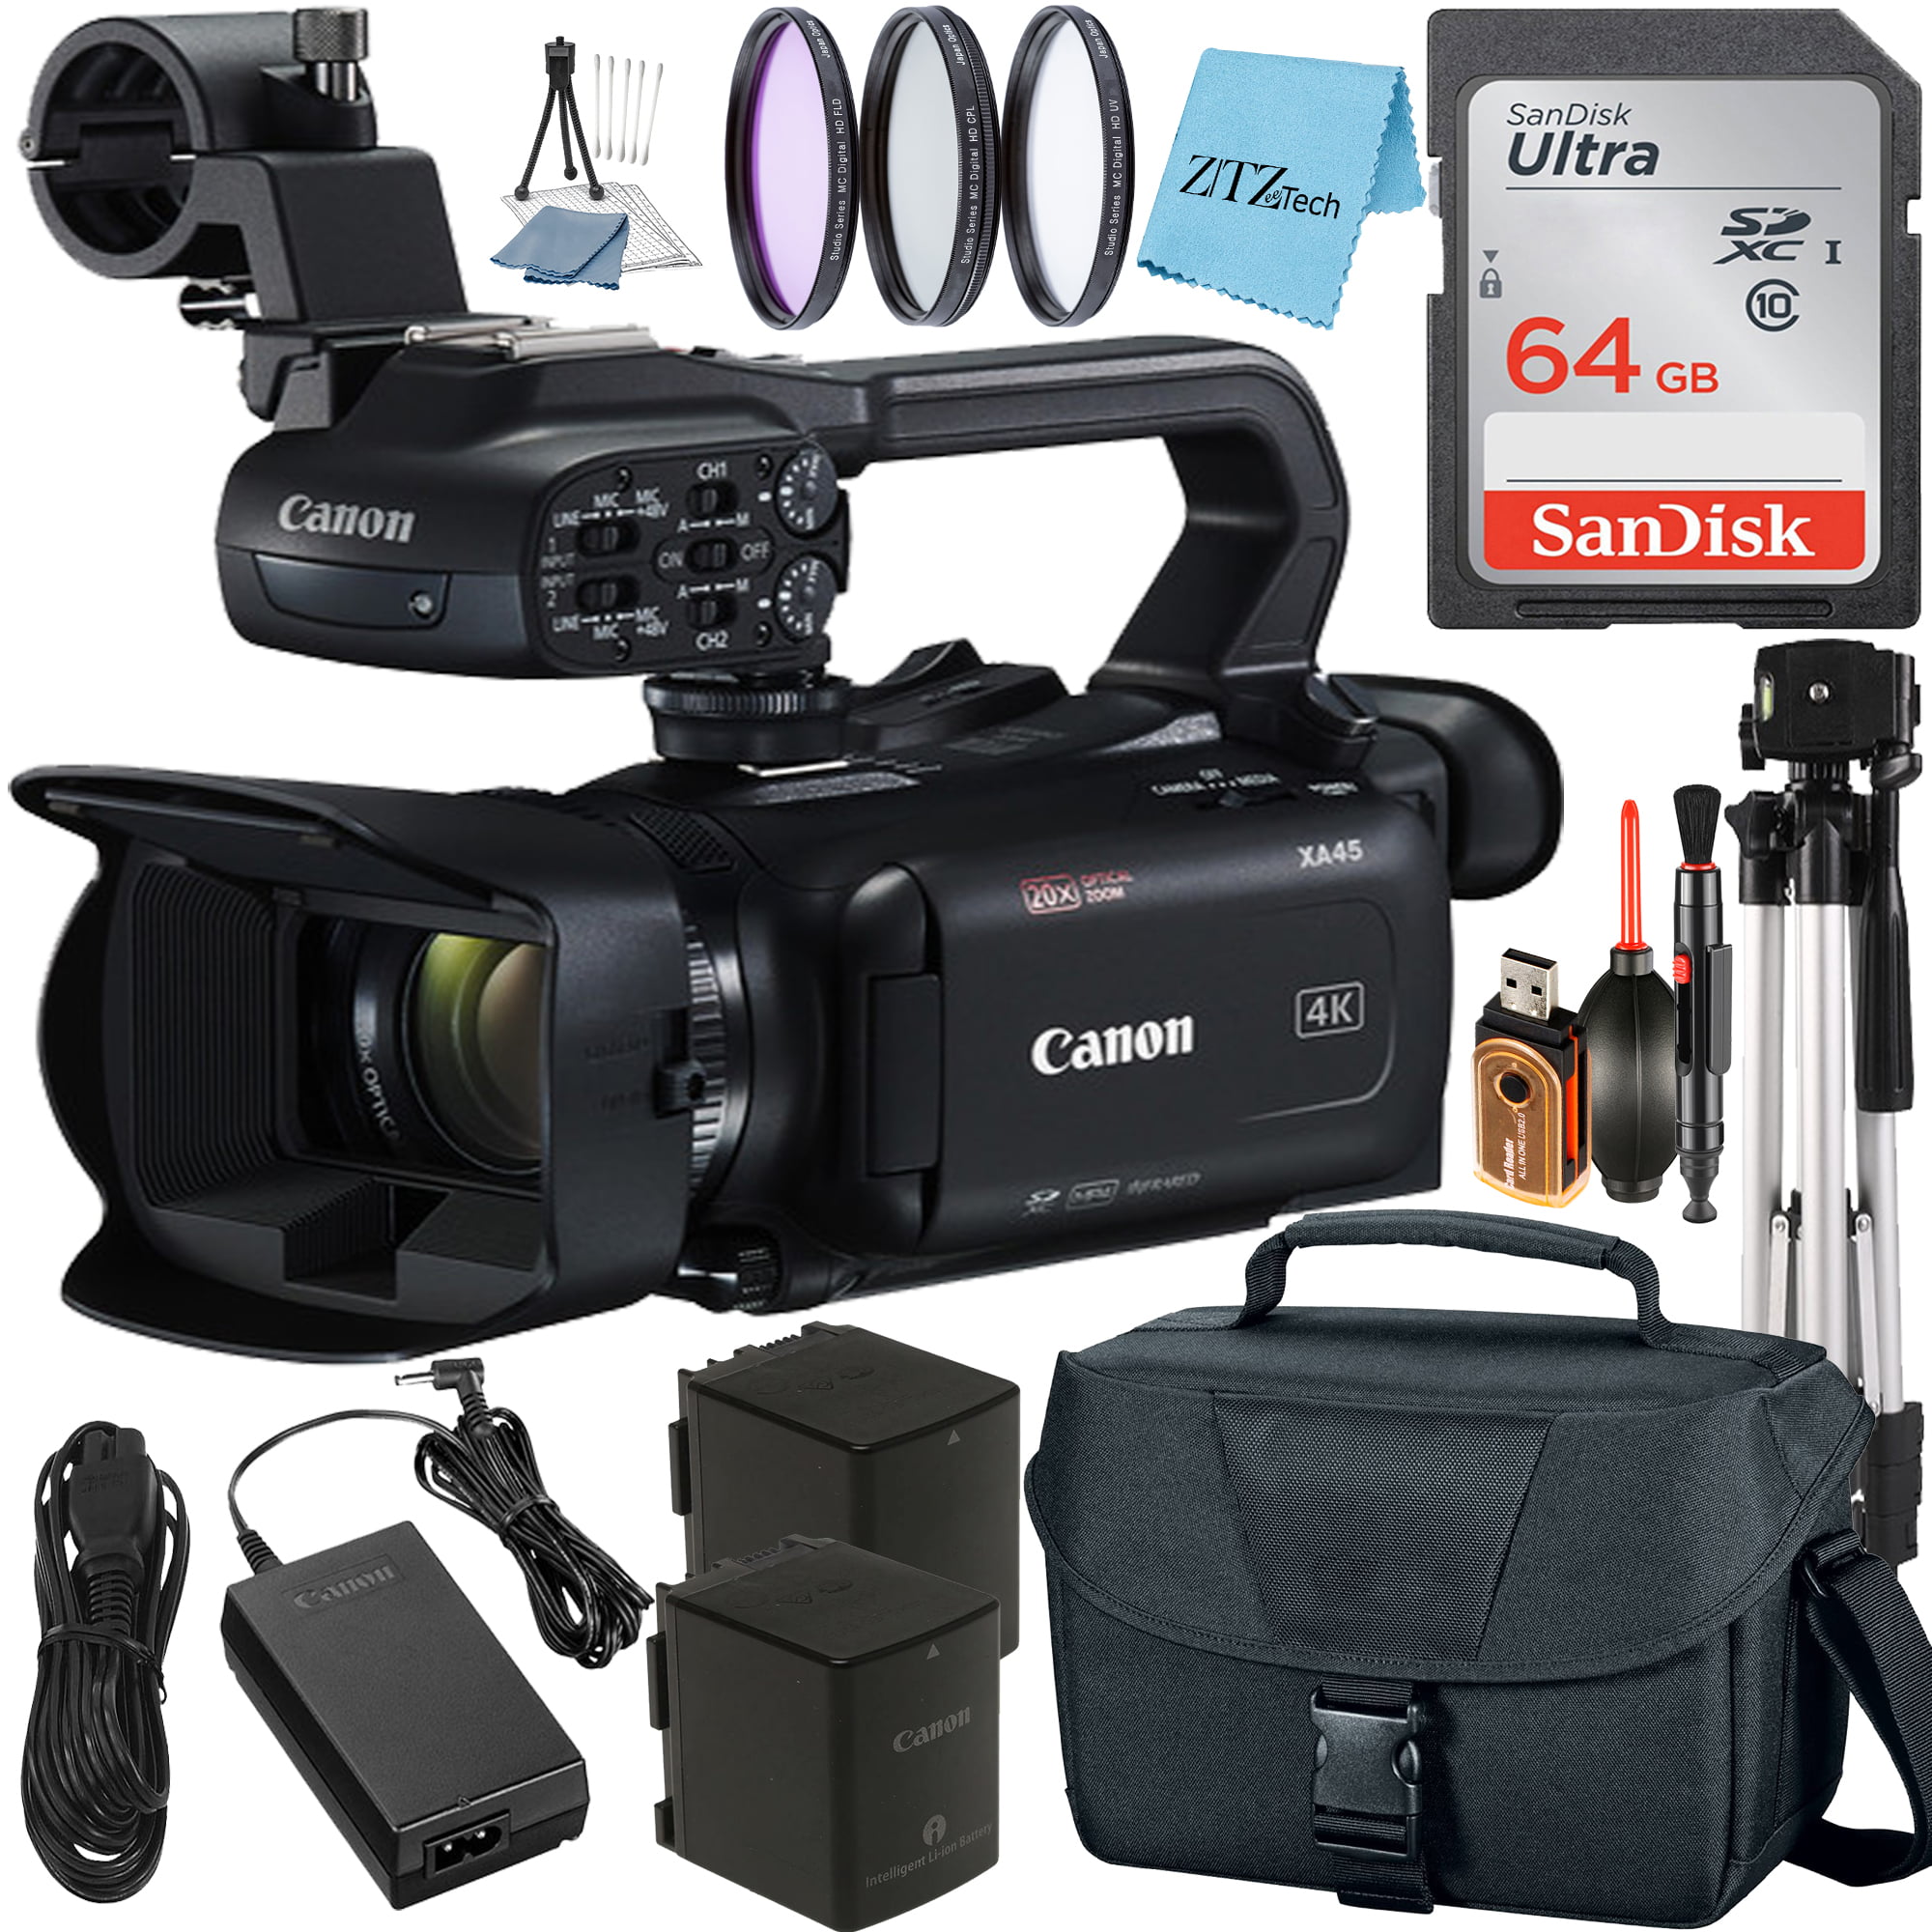 Canon XA45 Professional UHD 4K Video Camcorder with 64GB SanDisk Card + Case + Tripod + Filter + ZeeTech Accessory